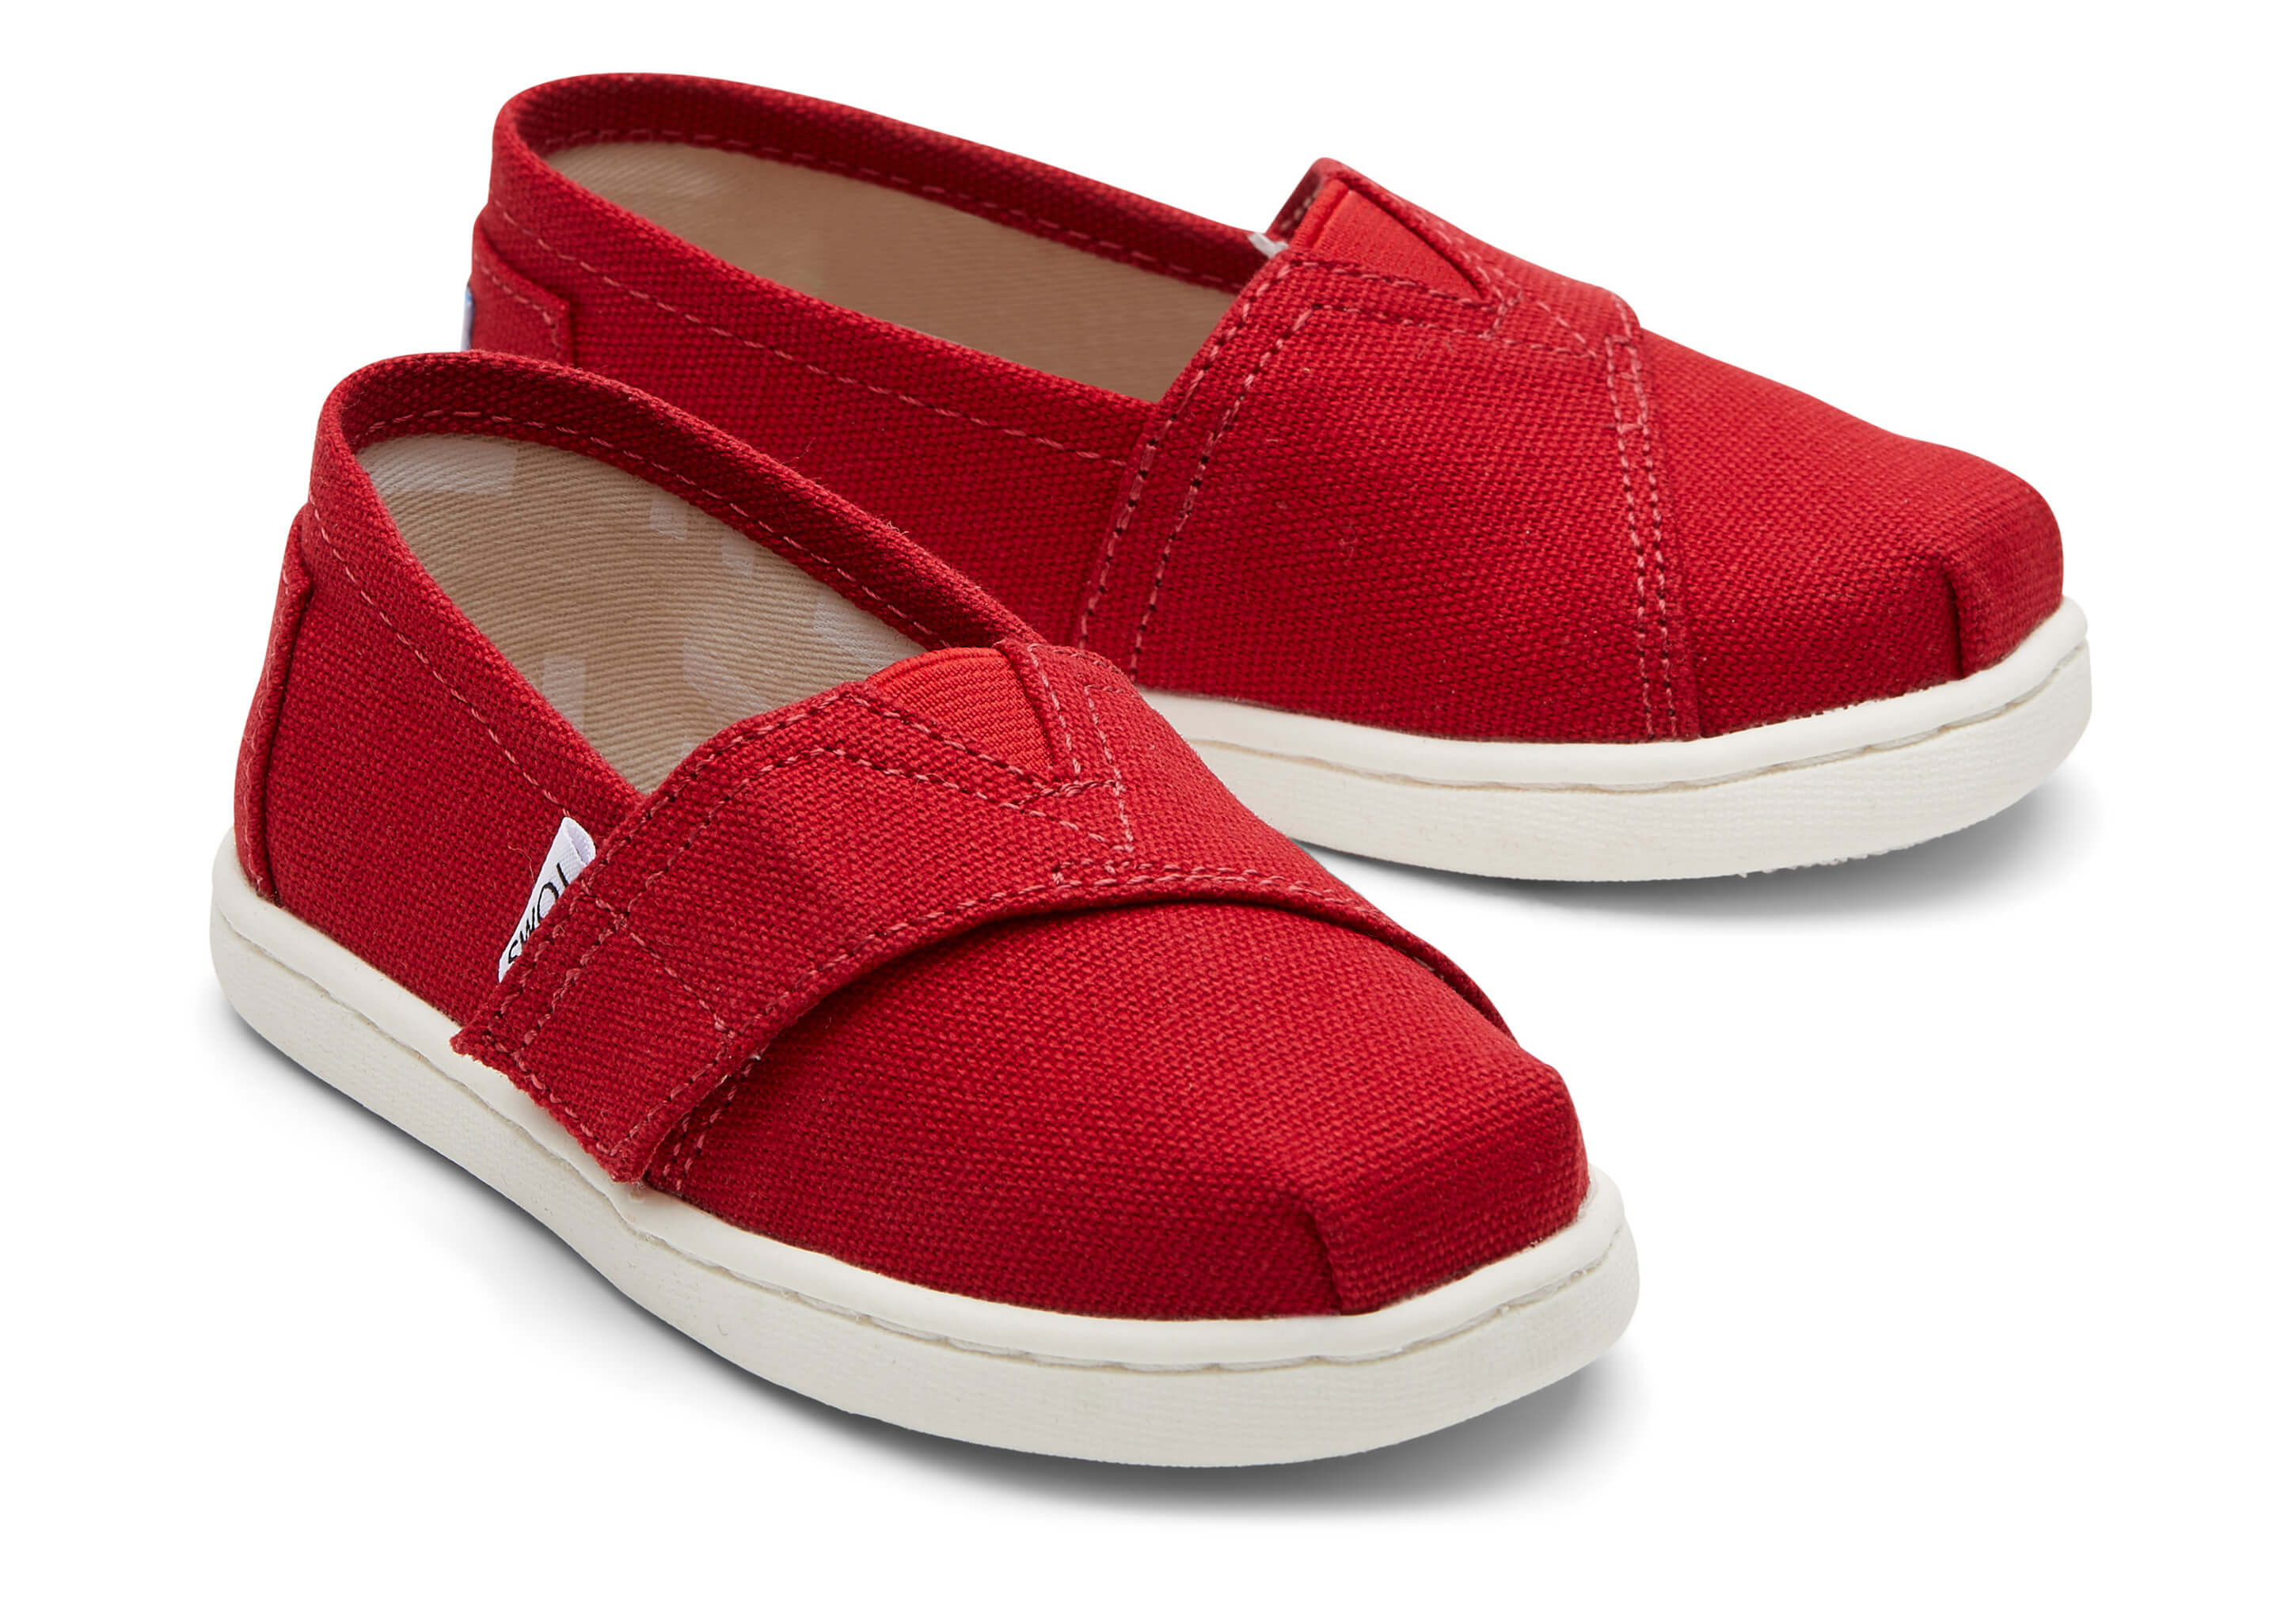 Buy Superga© 2750 JSTRAP CLASSIC KIDS Red - Kids Shoes